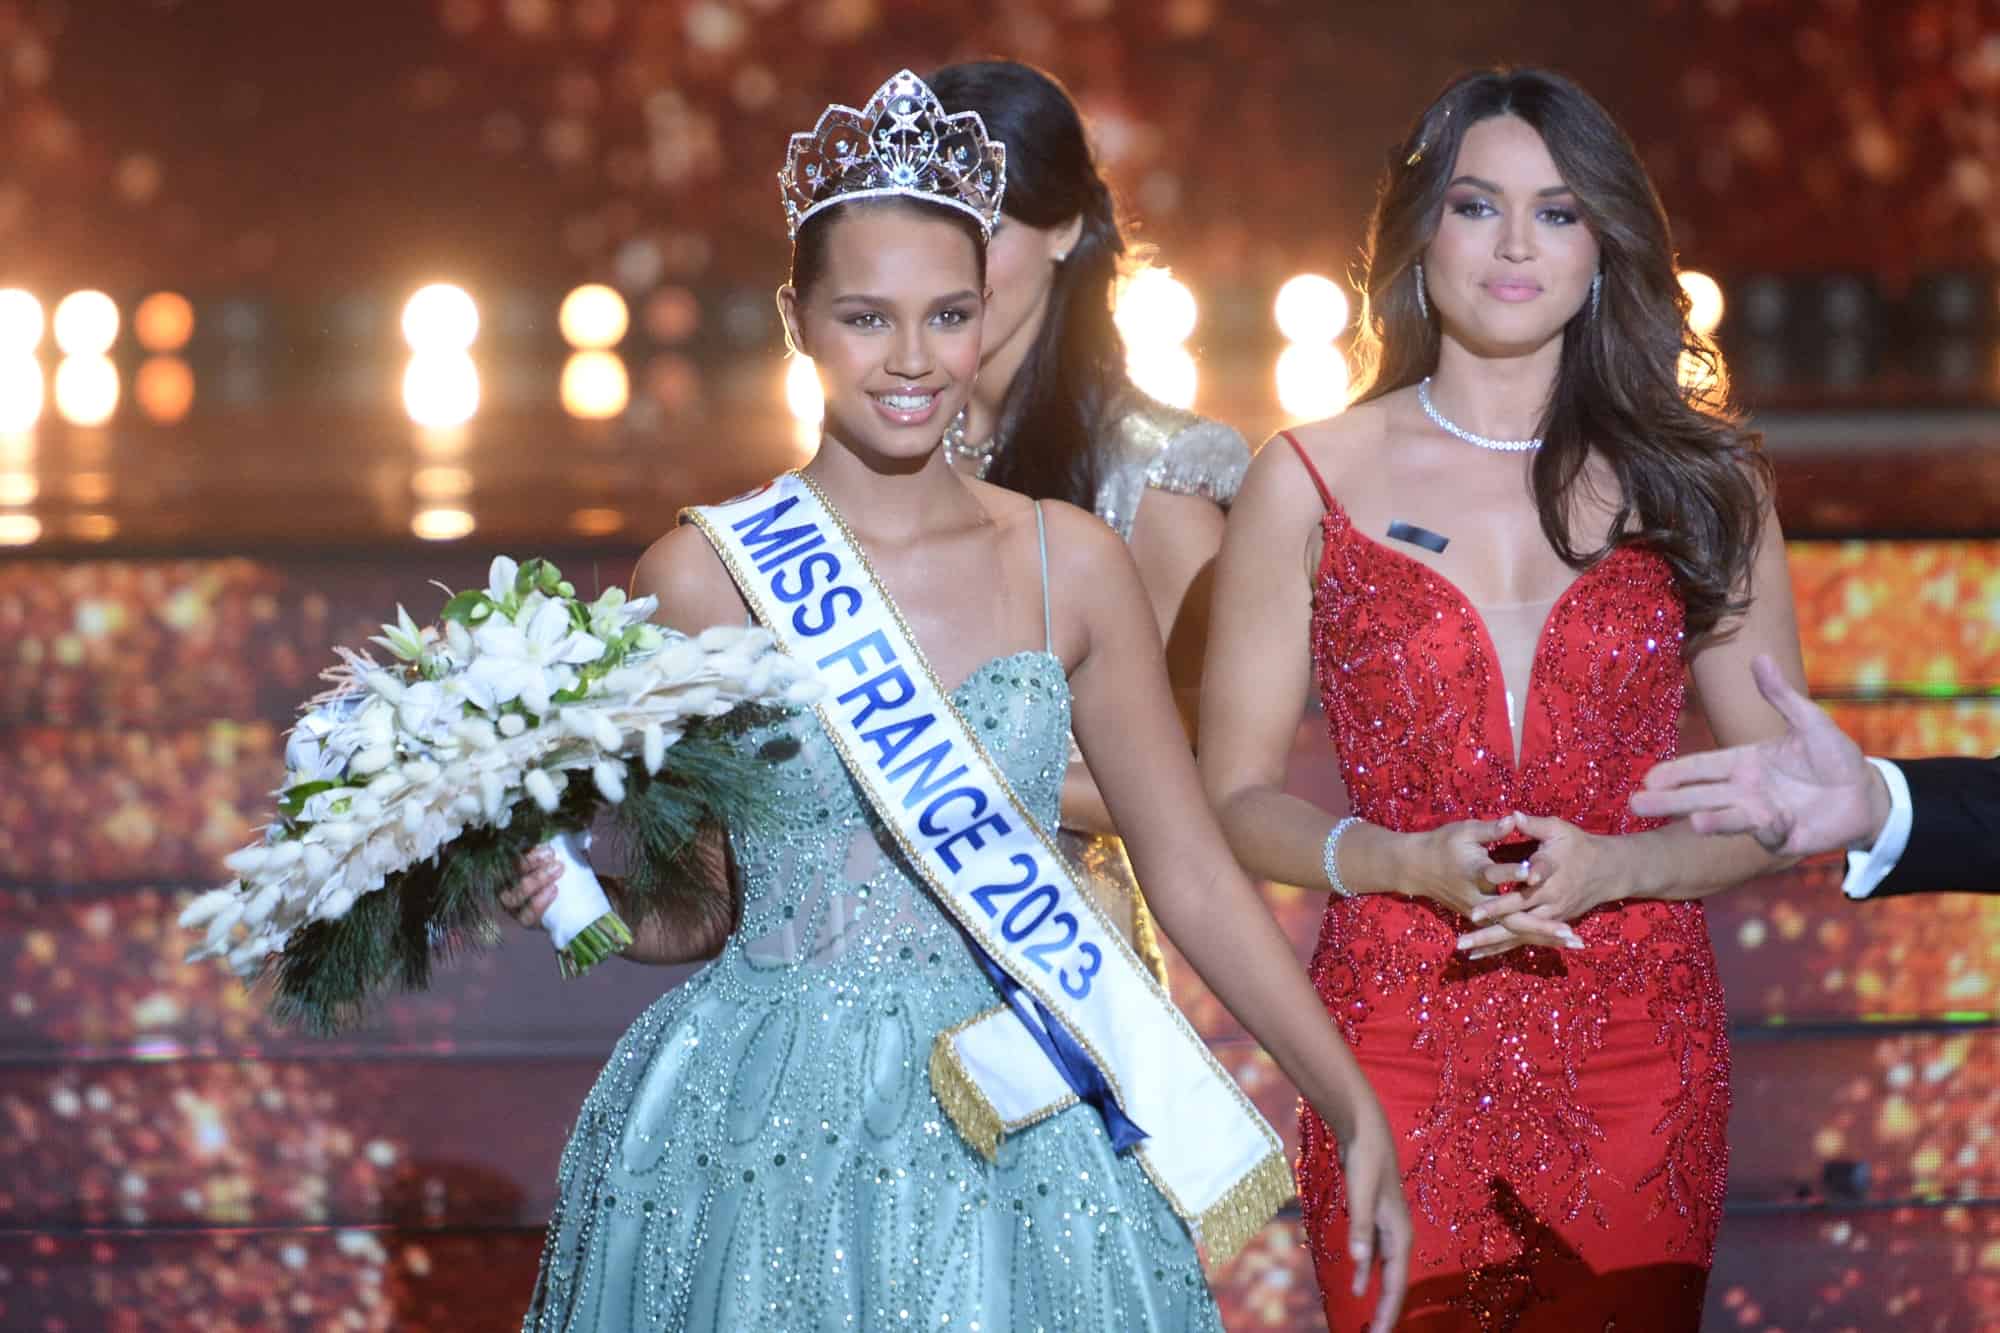 Miss France Beauty Pageant: New and More Inclusive Rules in Effect